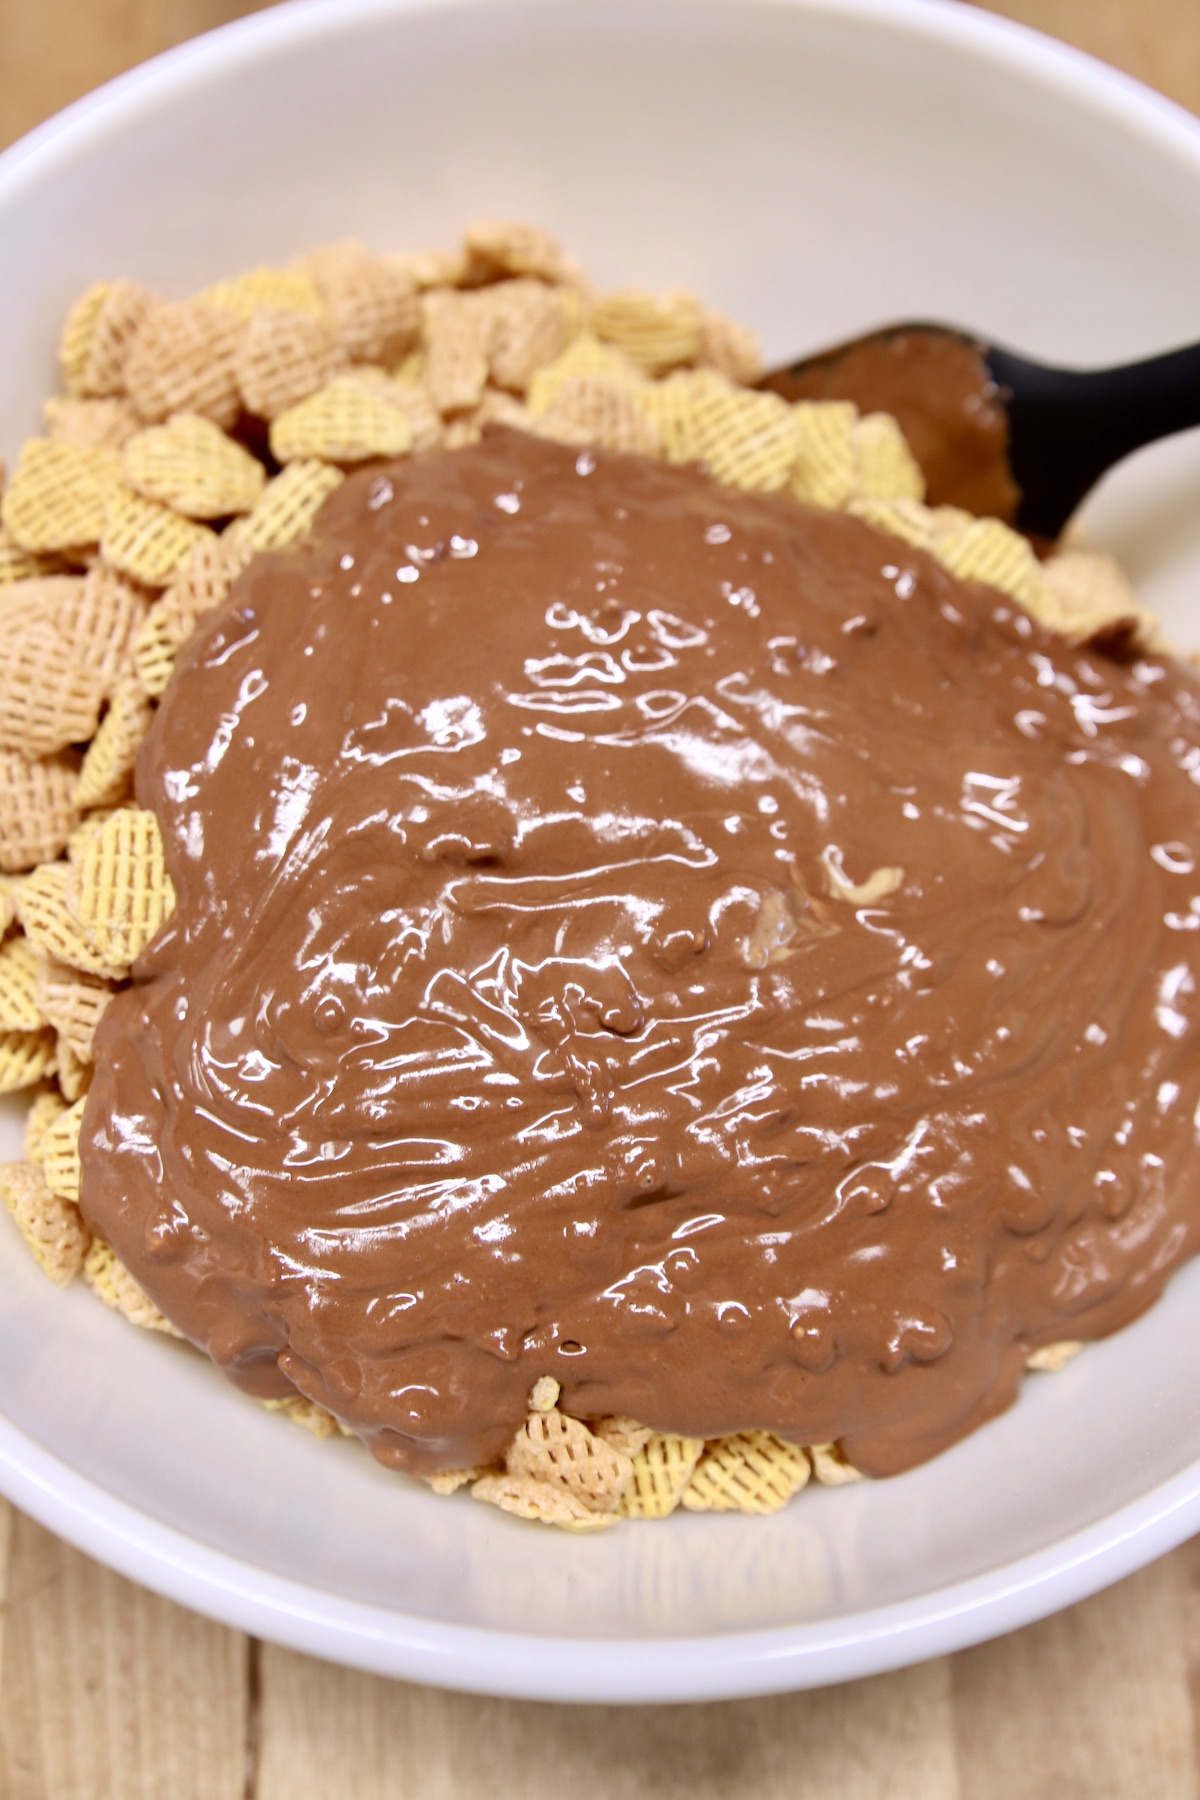 melted chocolate over cereal